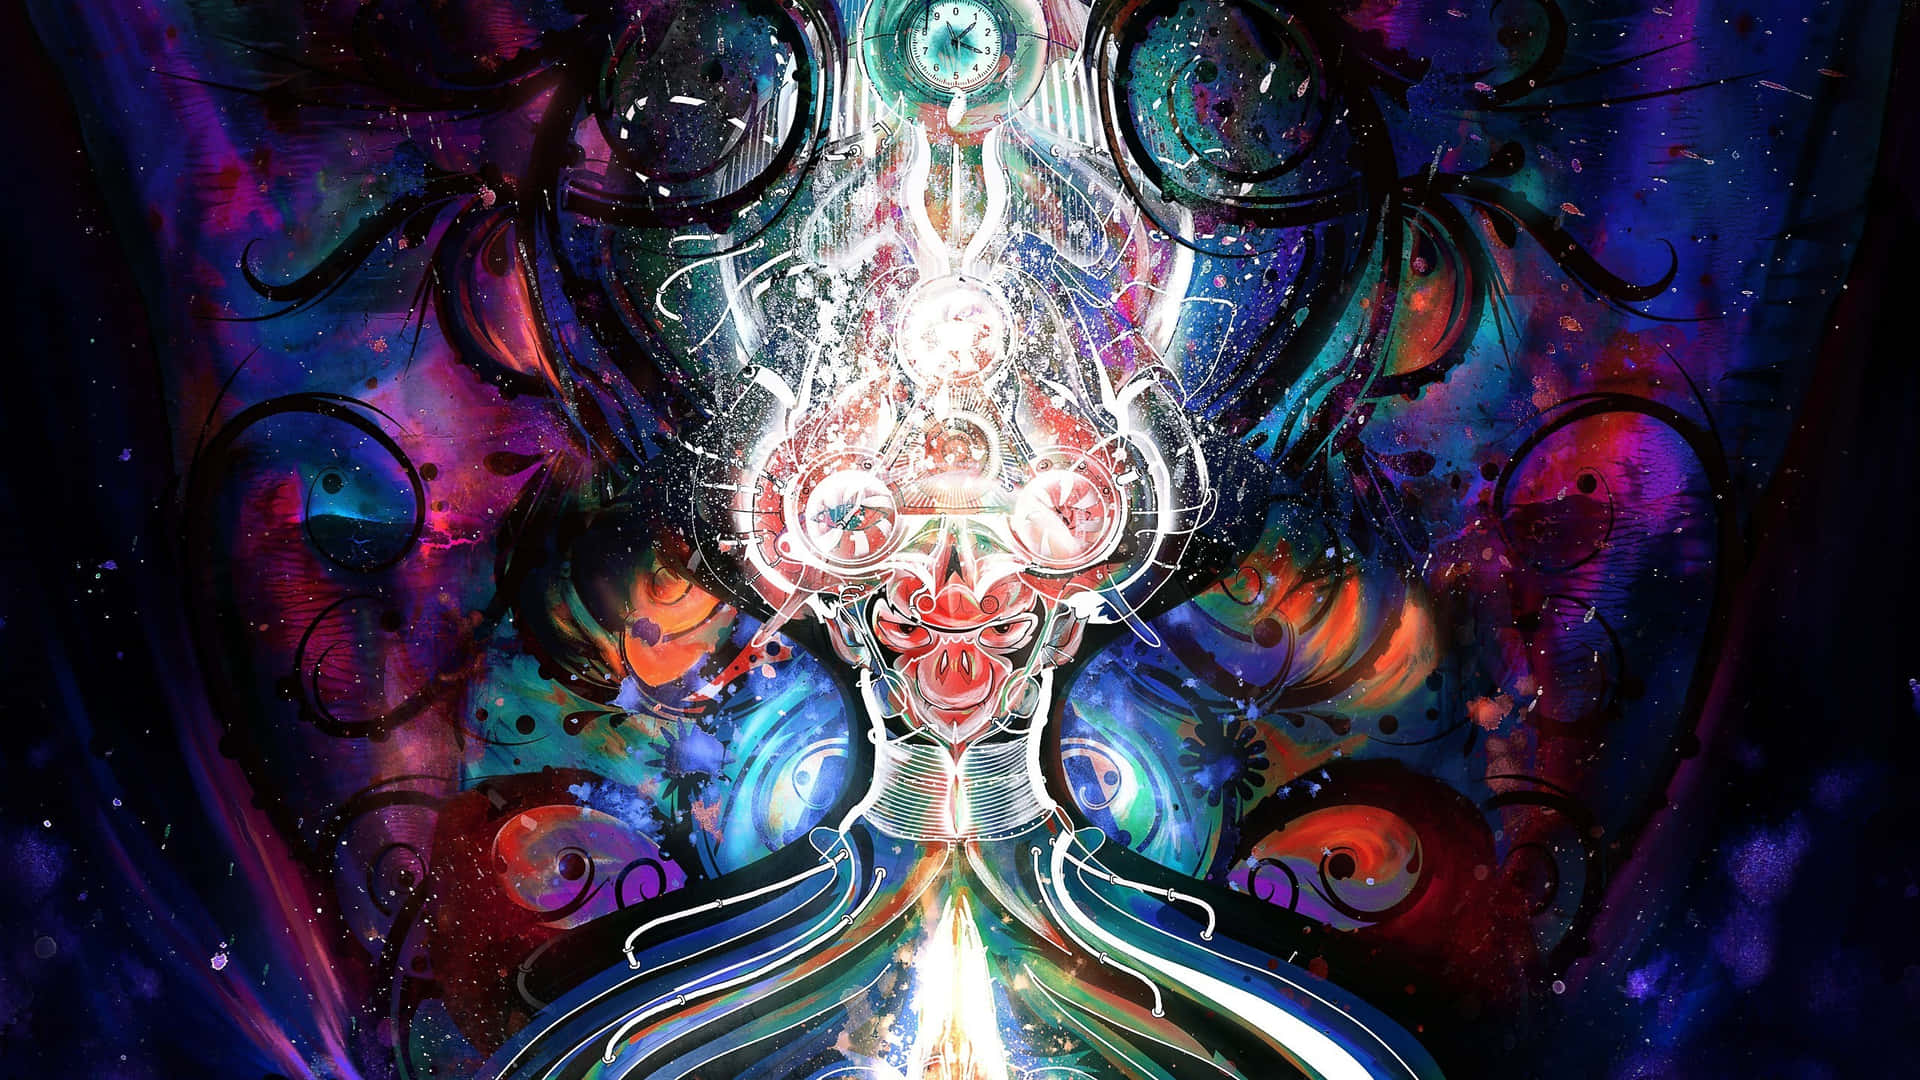 Hypnotic Psychedelic 3D Art Abstract Design Wallpaper